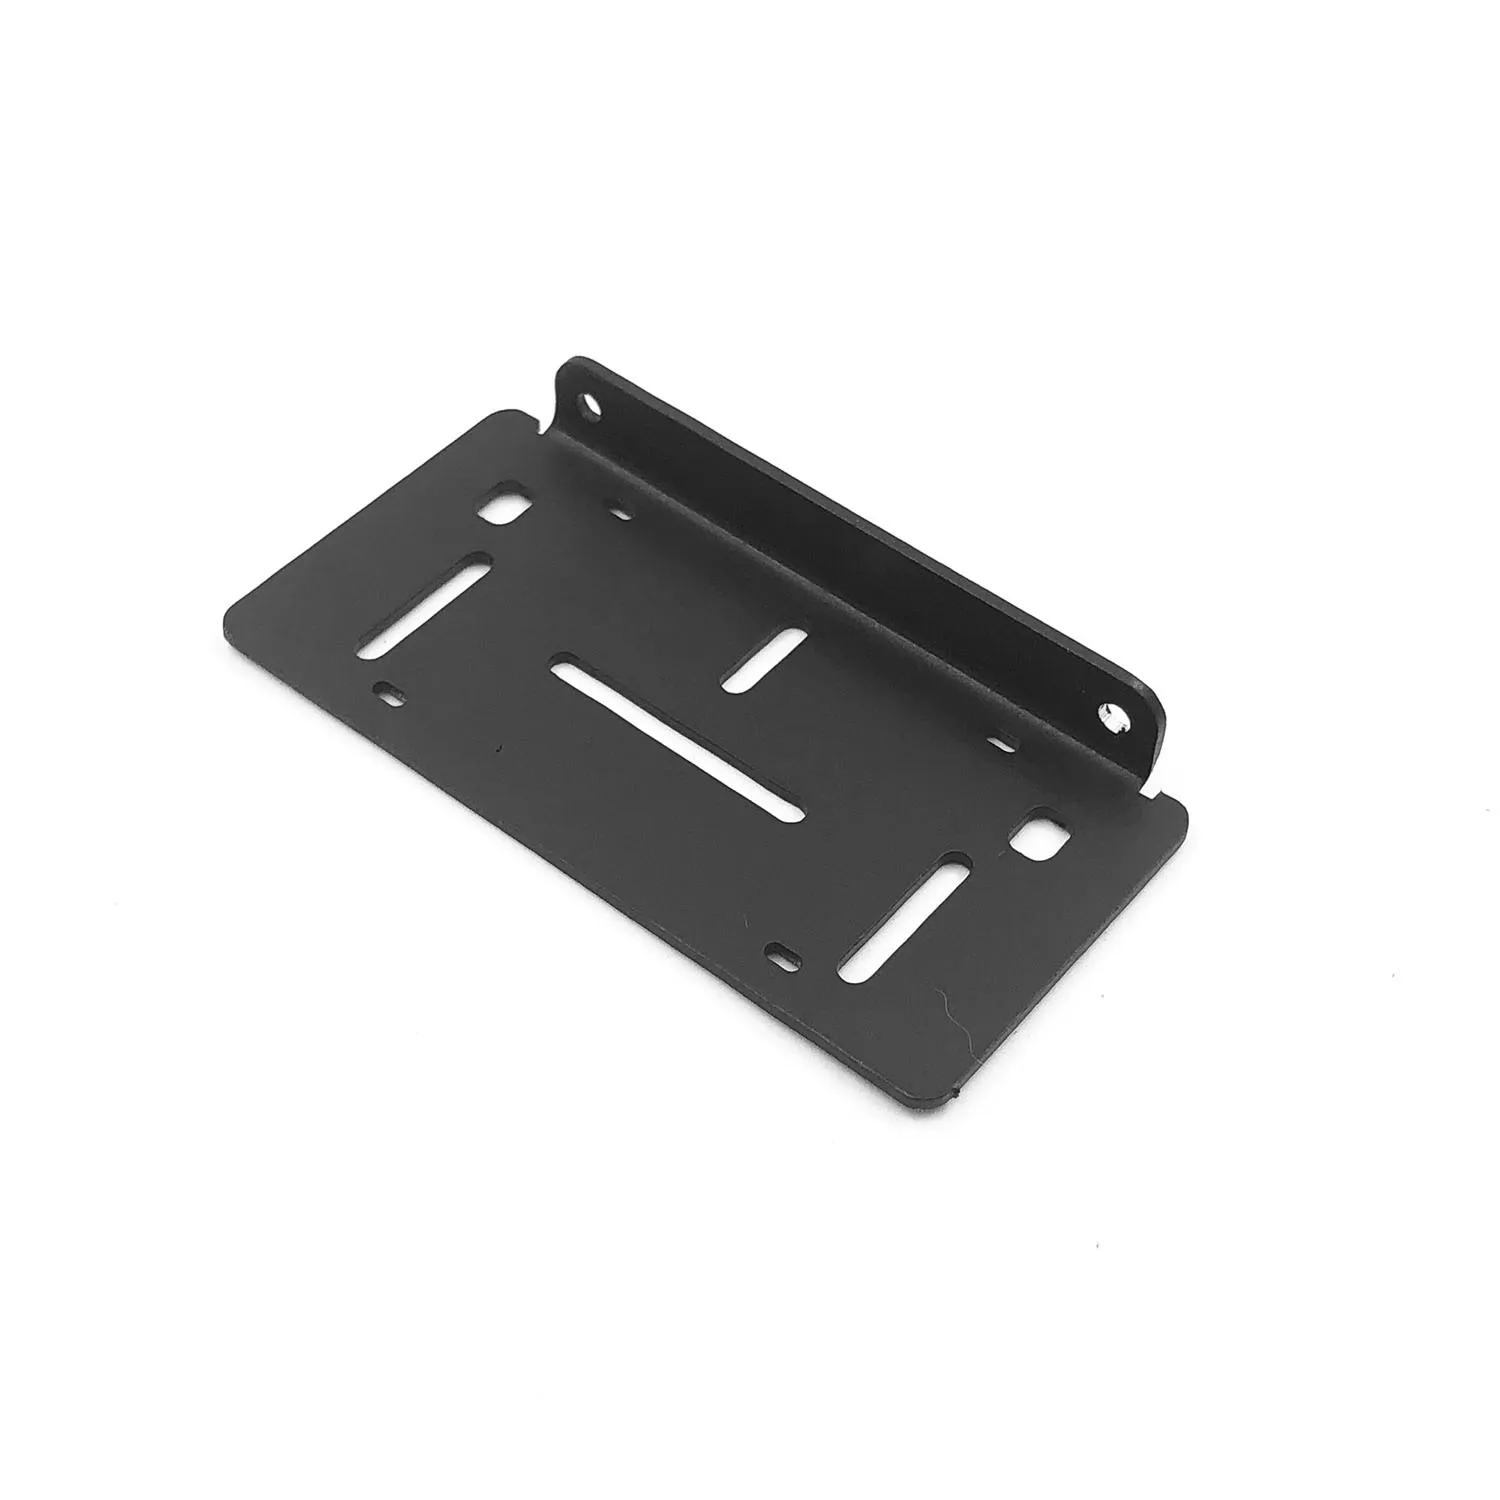 

CChand Metal License Plate Rear and Front for 1/6 RC Capo Samurai Rock Crawler Off-Road Sixer1 Vehicle Parts Model TH20848